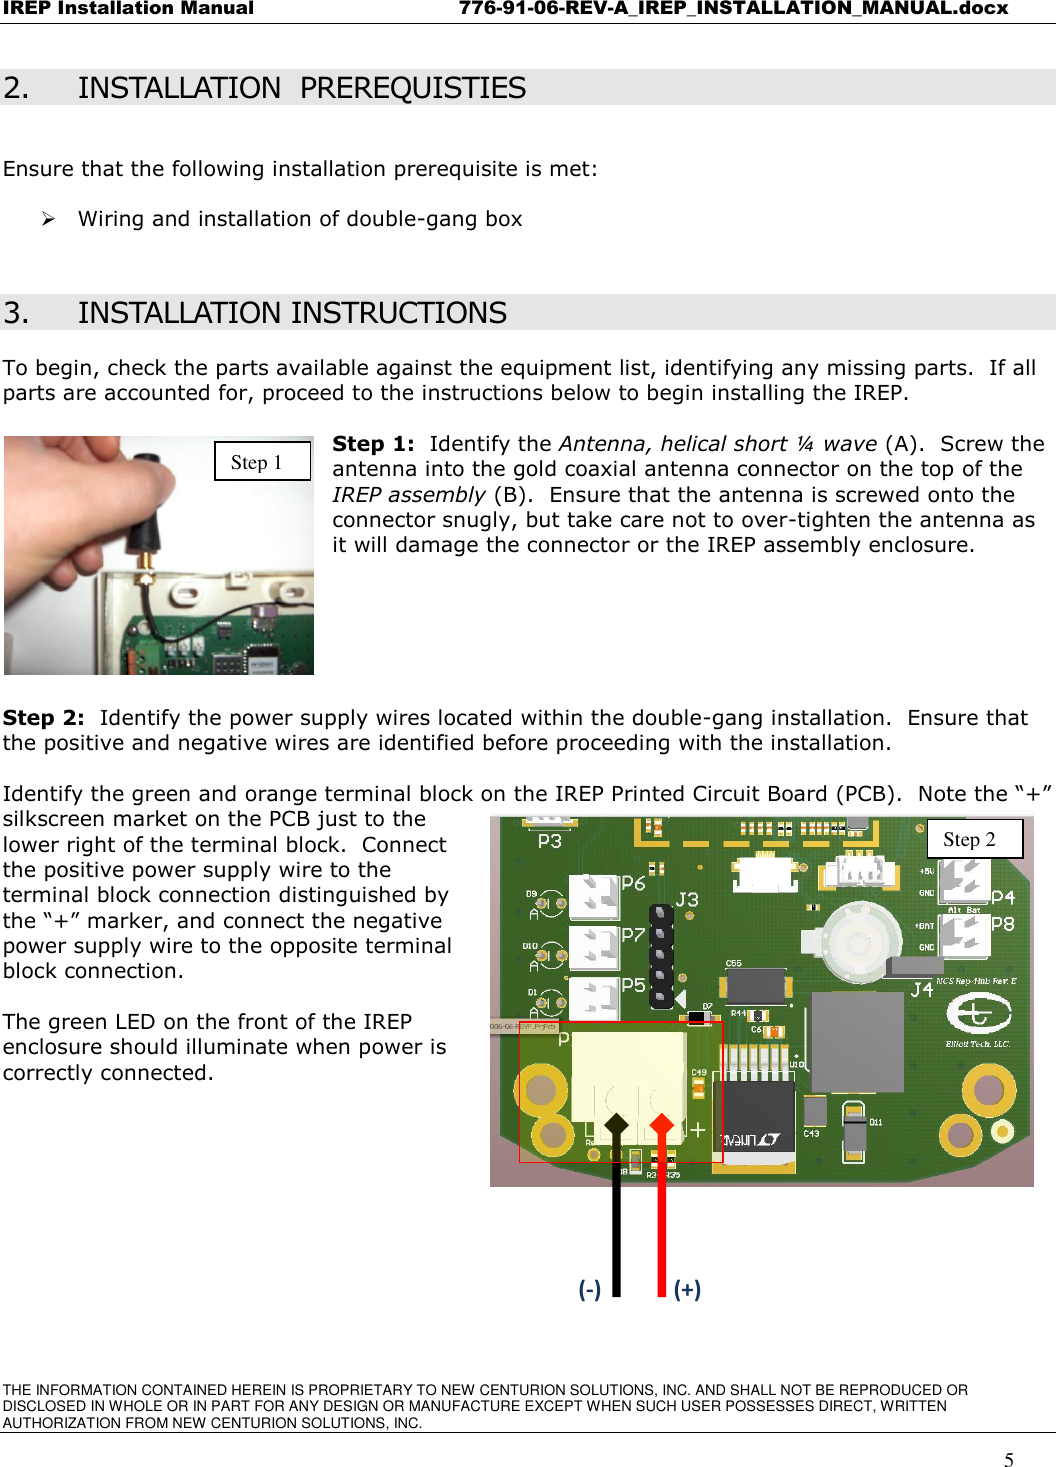 IREP Installation Manual   776-91-06-REV-A_IREP_INSTALLATION_MANUAL.docx THE INFORMATION CONTAINED HEREIN IS PROPRIETARY TO NEW CENTURION SOLUTIONS, INC. AND SHALL NOT BE REPRODUCED OR DISCLOSED IN WHOLE OR IN PART FOR ANY DESIGN OR MANUFACTURE EXCEPT WHEN SUCH USER POSSESSES DIRECT, WRITTEN AUTHORIZATION FROM NEW CENTURION SOLUTIONS, INC.    5 2. INSTALLATION  PREREQUISTIES  Ensure that the following installation prerequisite is met:   Wiring and installation of double-gang box  3. INSTALLATION INSTRUCTIONS To begin, check the parts available against the equipment list, identifying any missing parts.  If all parts are accounted for, proceed to the instructions below to begin installing the IREP.  Step 1:  Identify the Antenna, helical short ¼ wave (A).  Screw the antenna into the gold coaxial antenna connector on the top of the IREP assembly (B).  Ensure that the antenna is screwed onto the connector snugly, but take care not to over-tighten the antenna as it will damage the connector or the IREP assembly enclosure.      Step 2:  Identify the power supply wires located within the double-gang installation.  Ensure that the positive and negative wires are identified before proceeding with the installation.    Identify the green and orange terminal block on the IREP Printed Circuit Board (PCB).  Note the “+” silkscreen market on the PCB just to the lower right of the terminal block.  Connect the positive power supply wire to the terminal block connection distinguished by the “+” marker, and connect the negative power supply wire to the opposite terminal block connection.   The green LED on the front of the IREP enclosure should illuminate when power is correctly connected.            Type-A (+) (-) Step 1 Step 2 